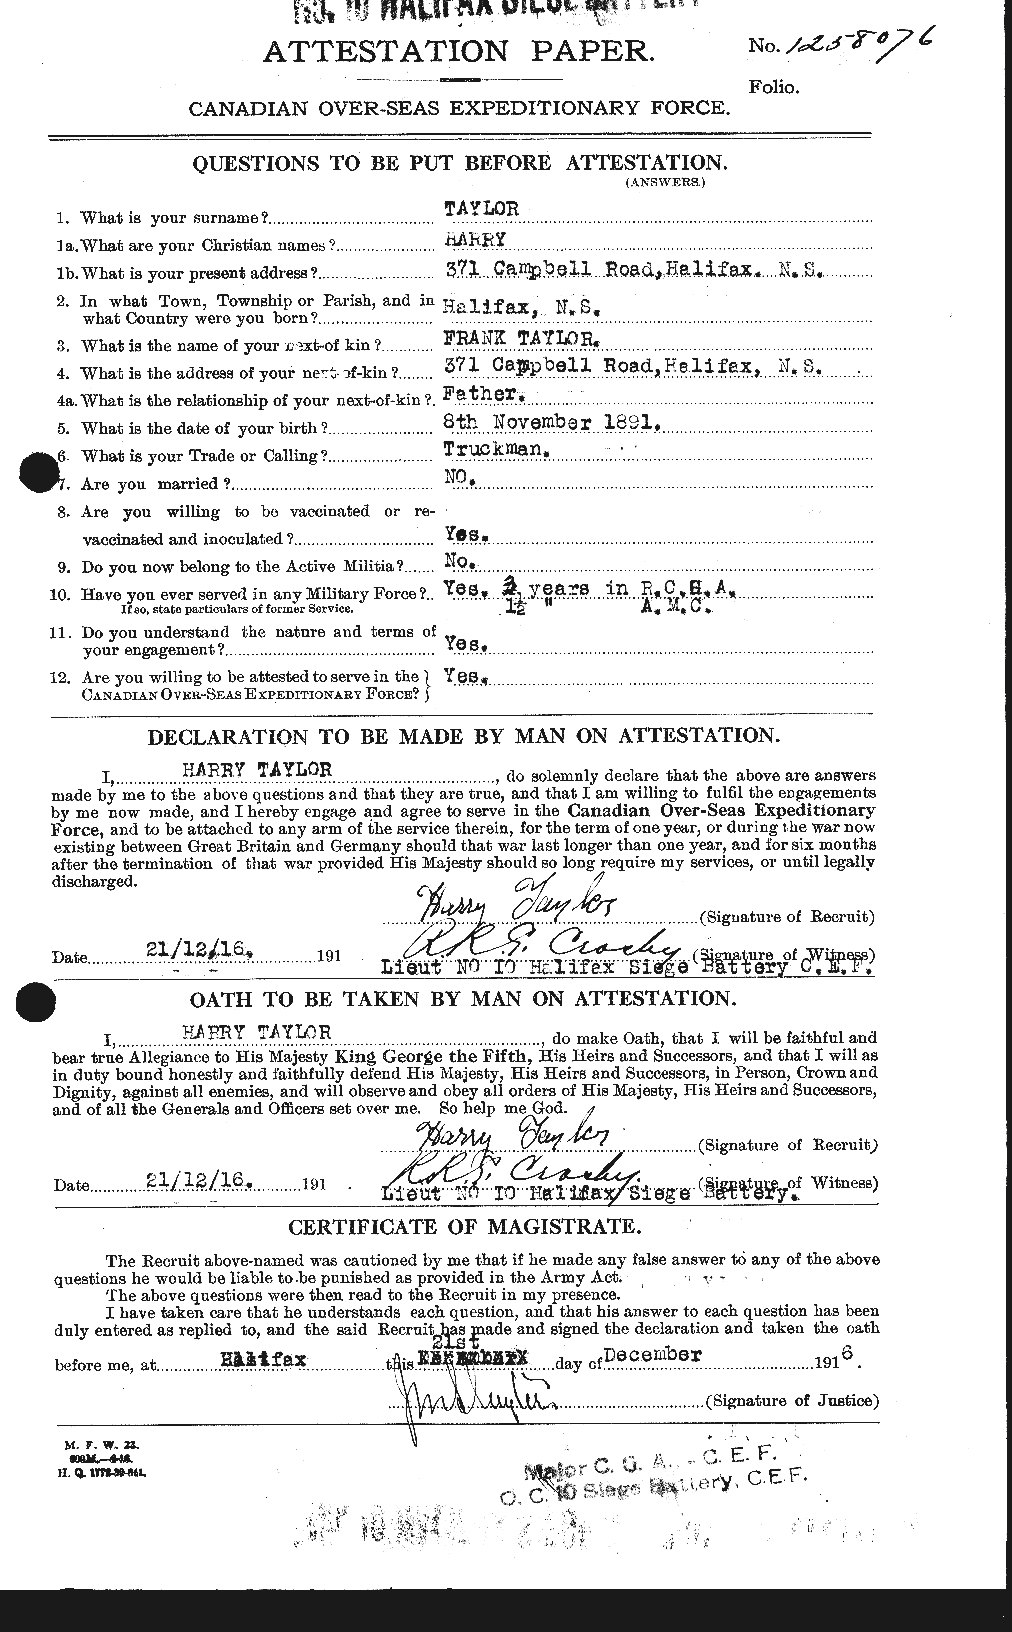 Personnel Records of the First World War - CEF 626461a